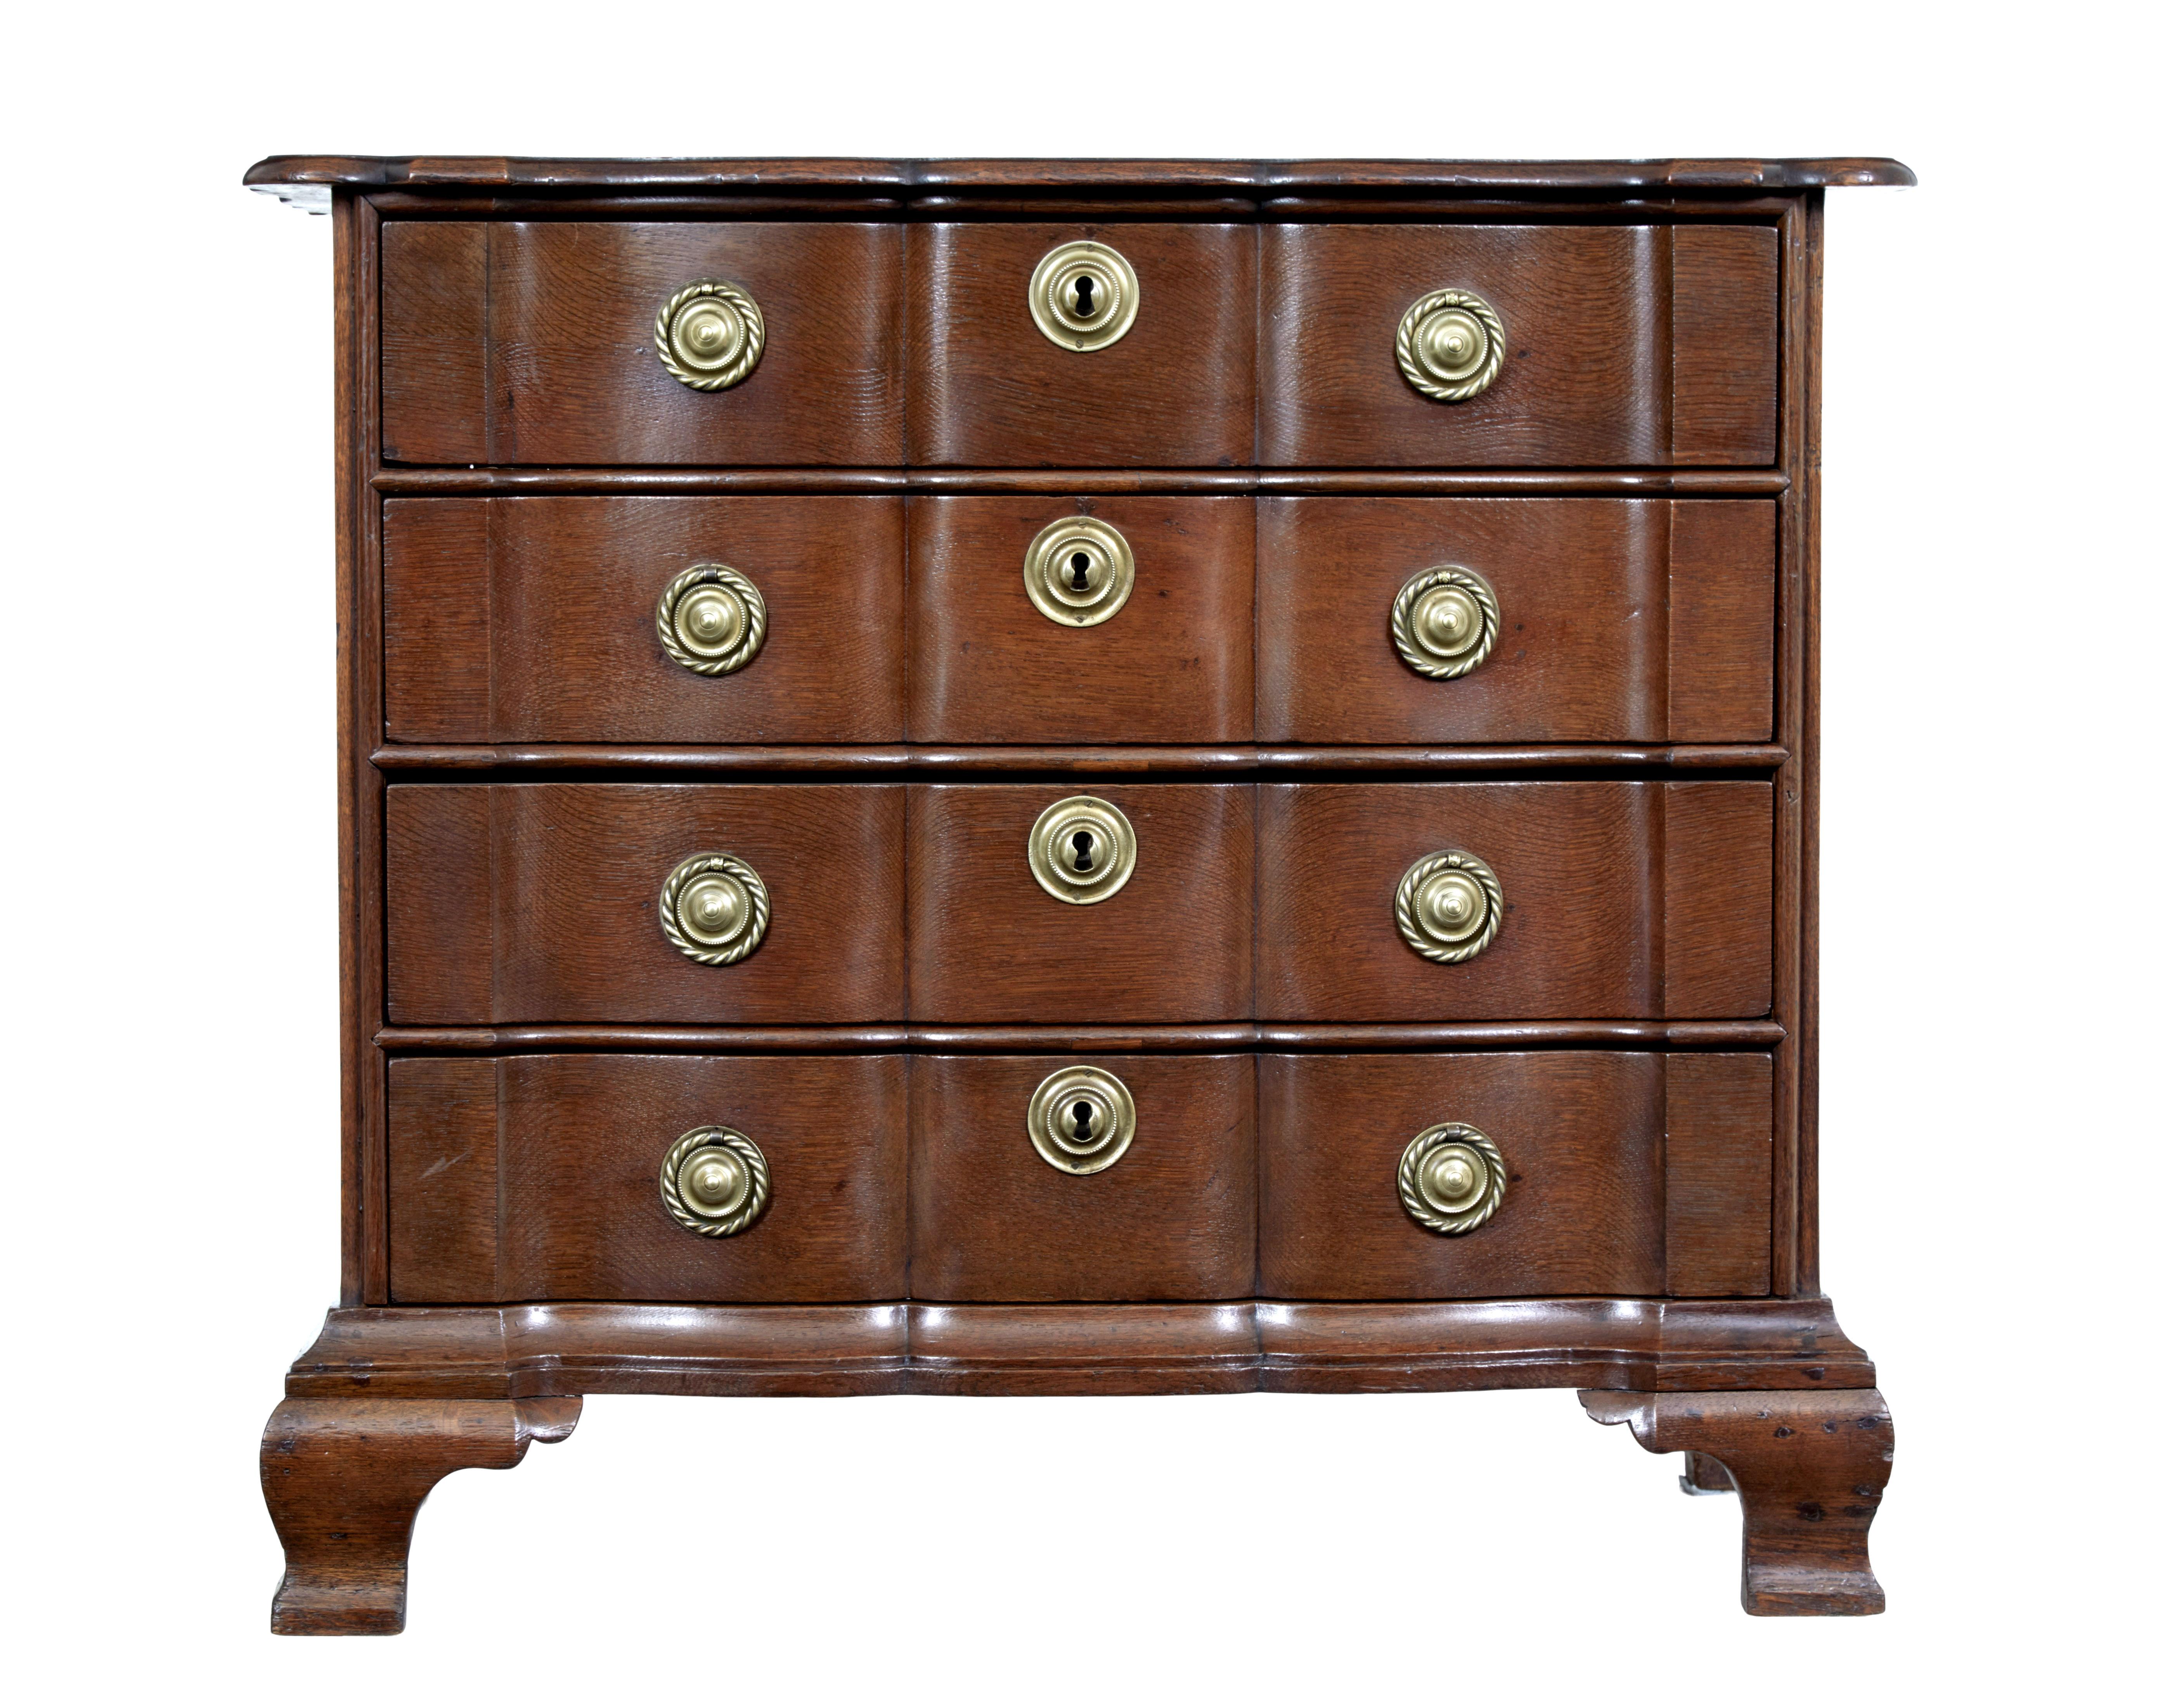 19th century shaped front oak chest of drawers circa 1880.

Dutch shaped oak chest of drawers commode with its serpentine fronted commode very much in the dutch taste. 4 drawers with original brass rope ring handles and escutcheons.

Standing on